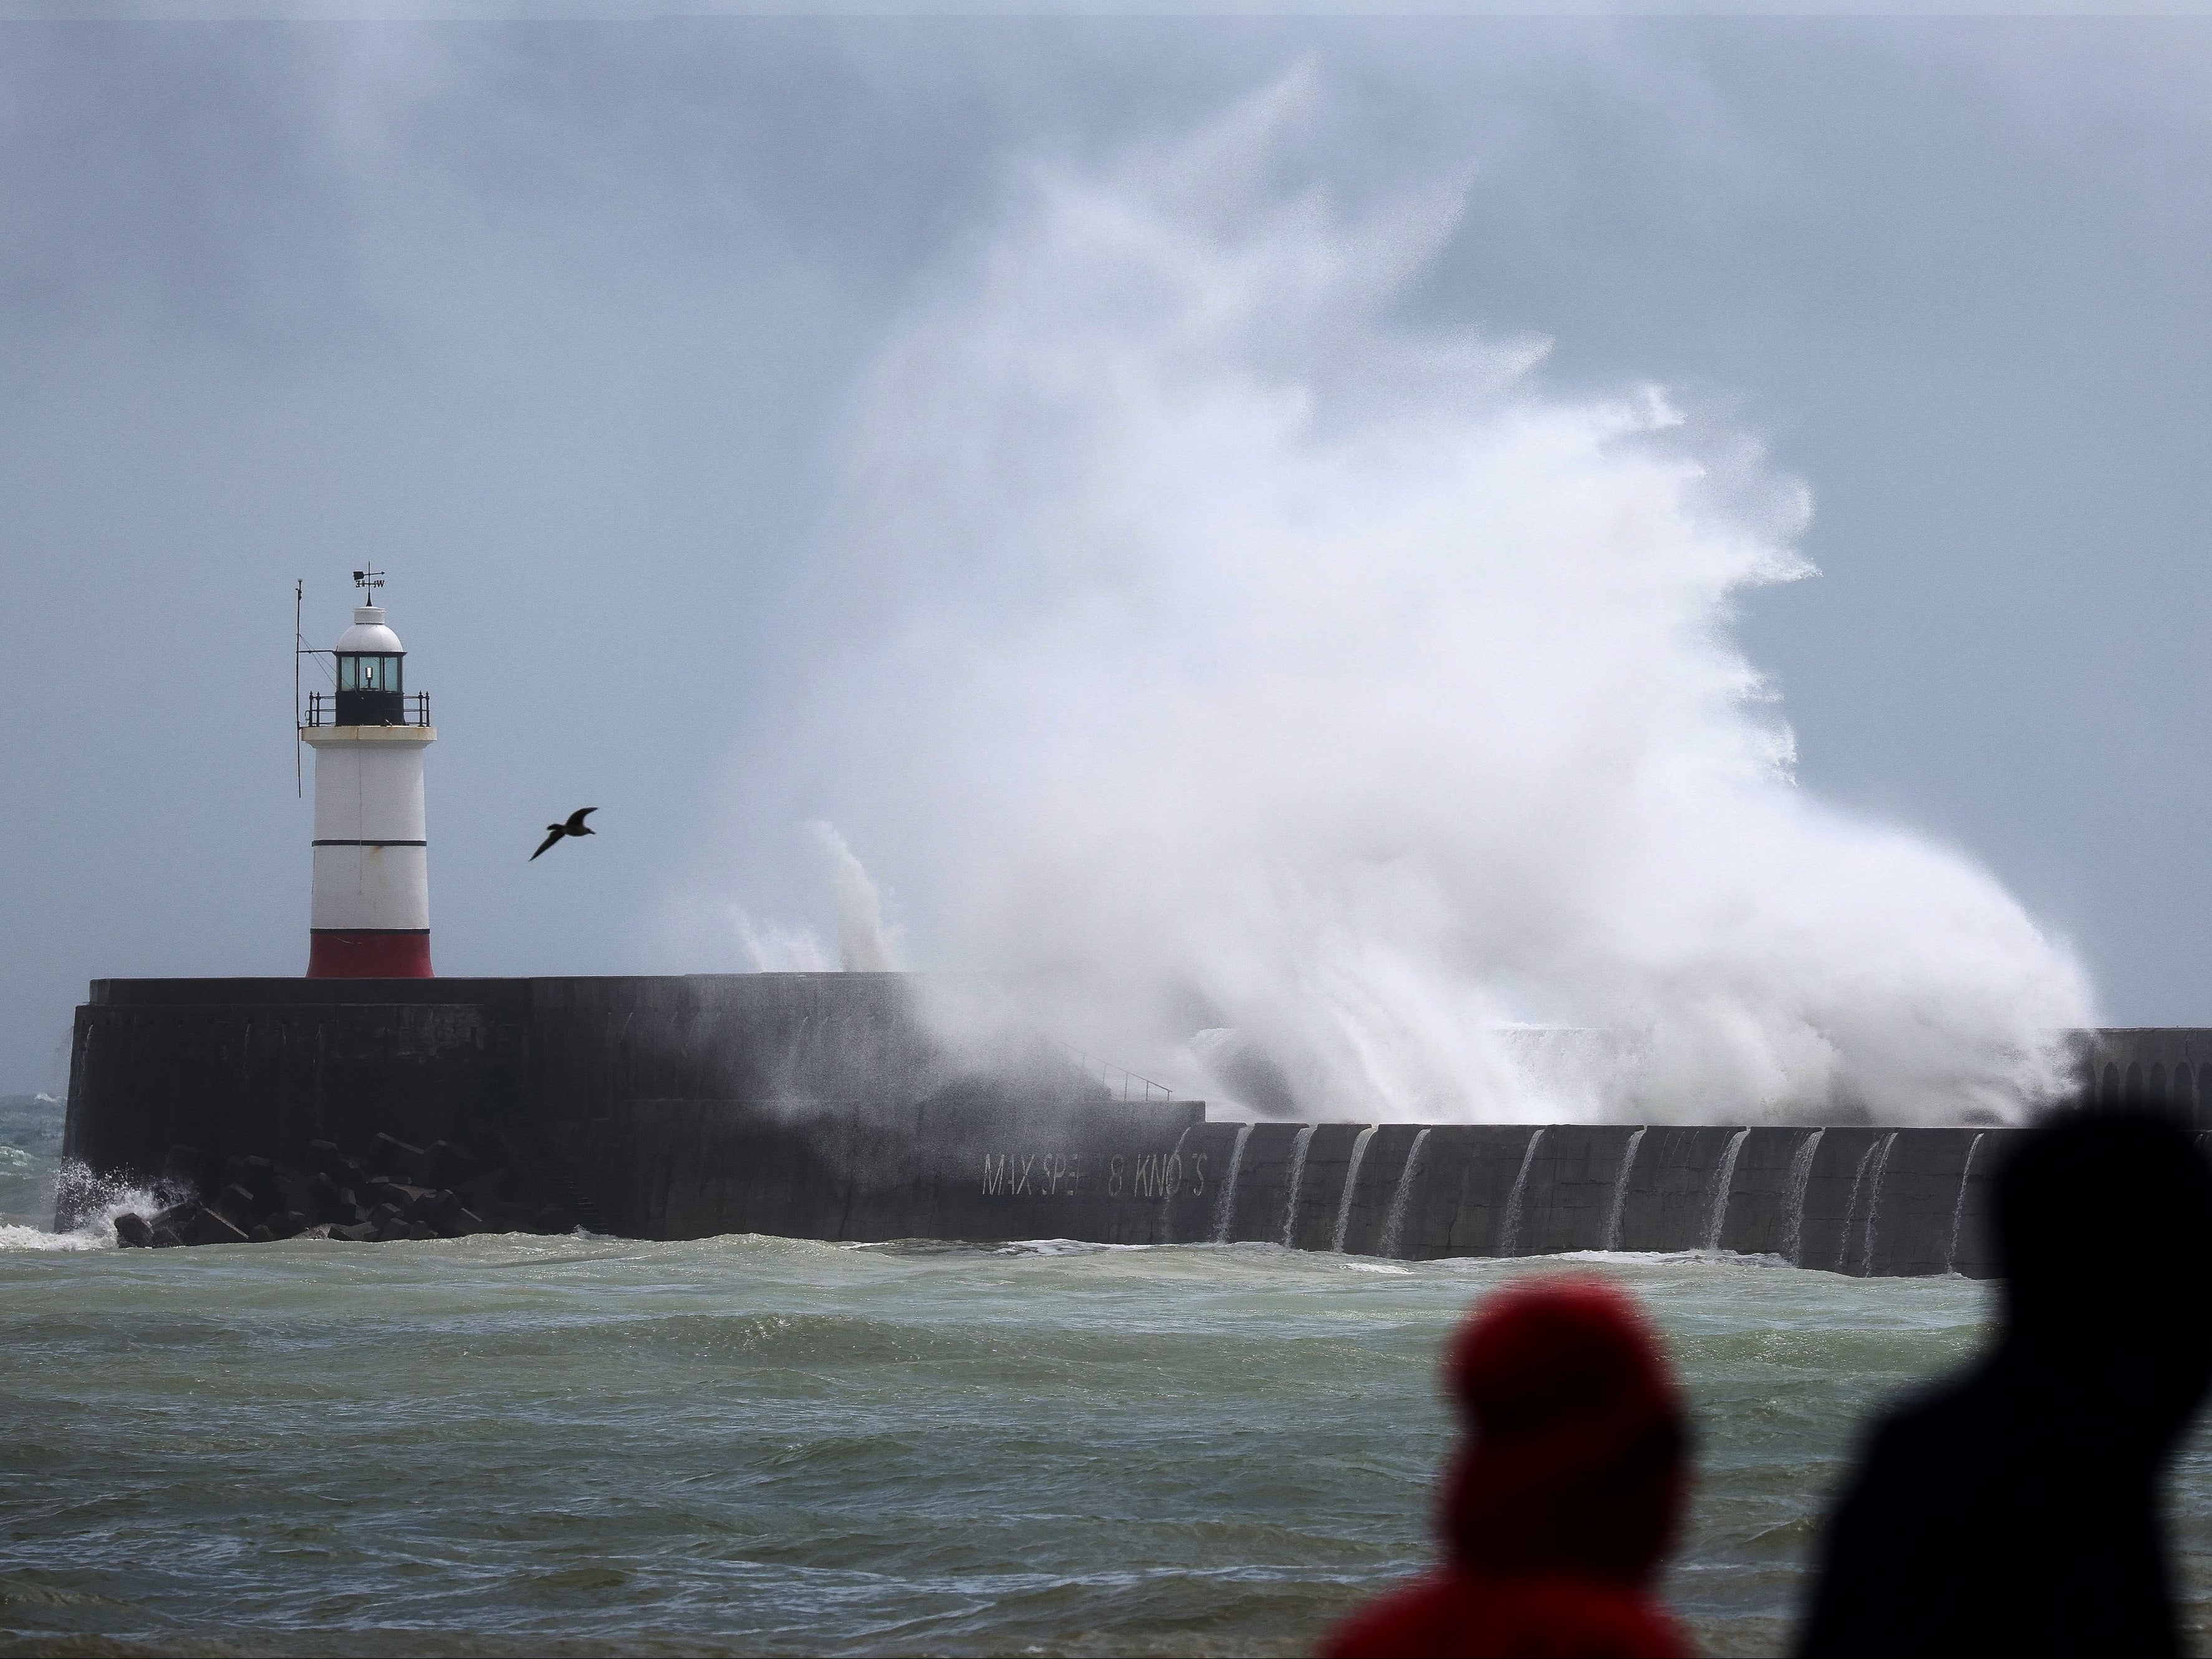 Coastal areas were battered by high winds across much of the UK